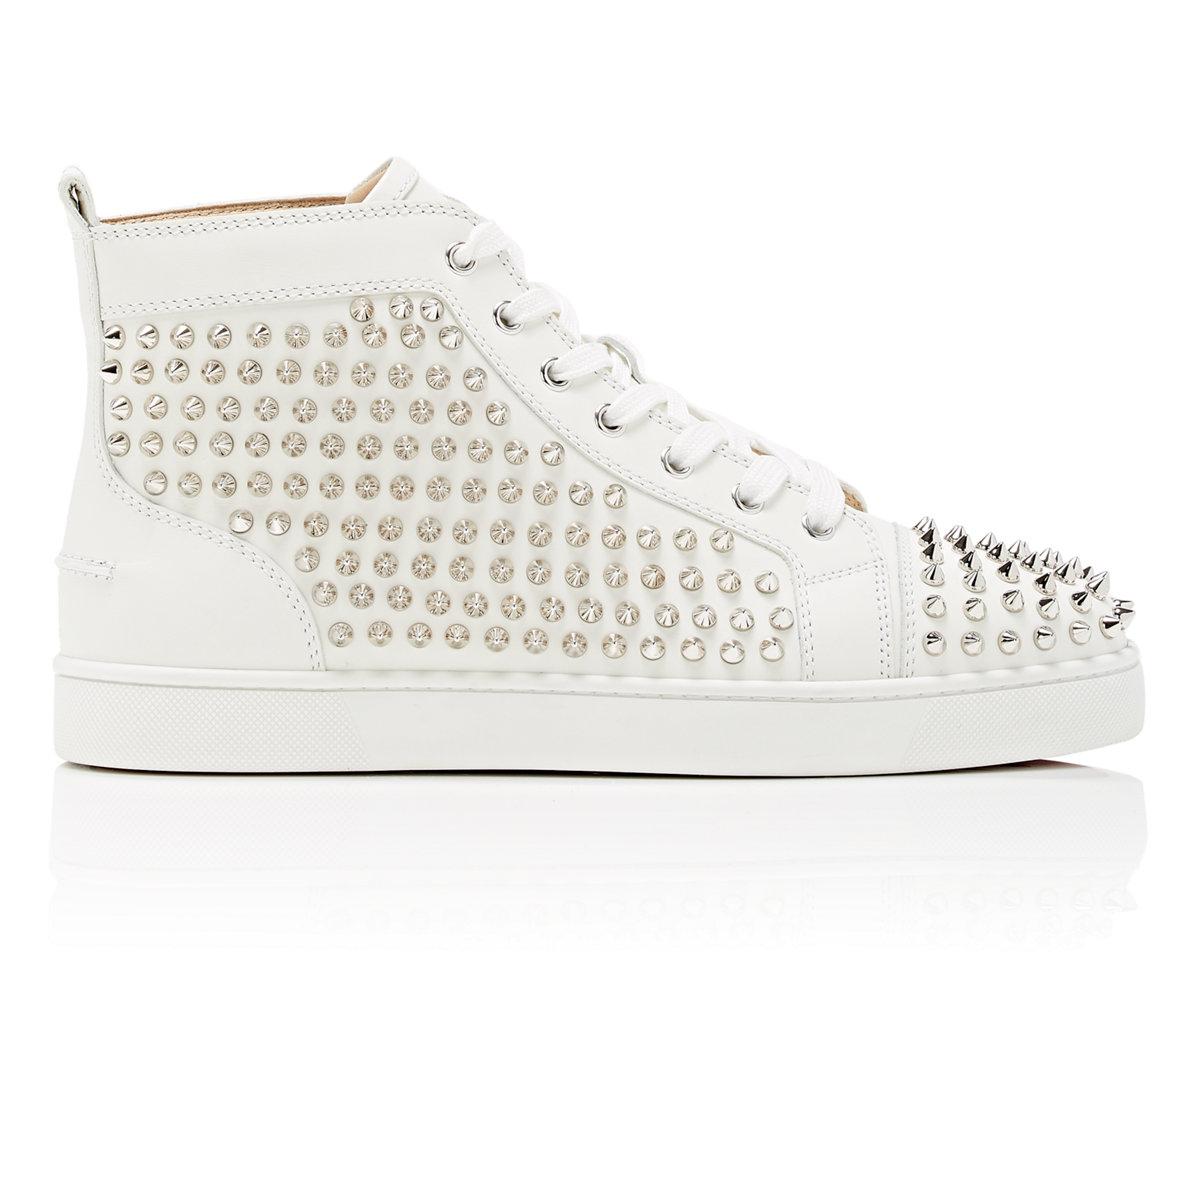 Lyst - Christian Louboutin Louis Spiked Leather High Top Trainers in ...